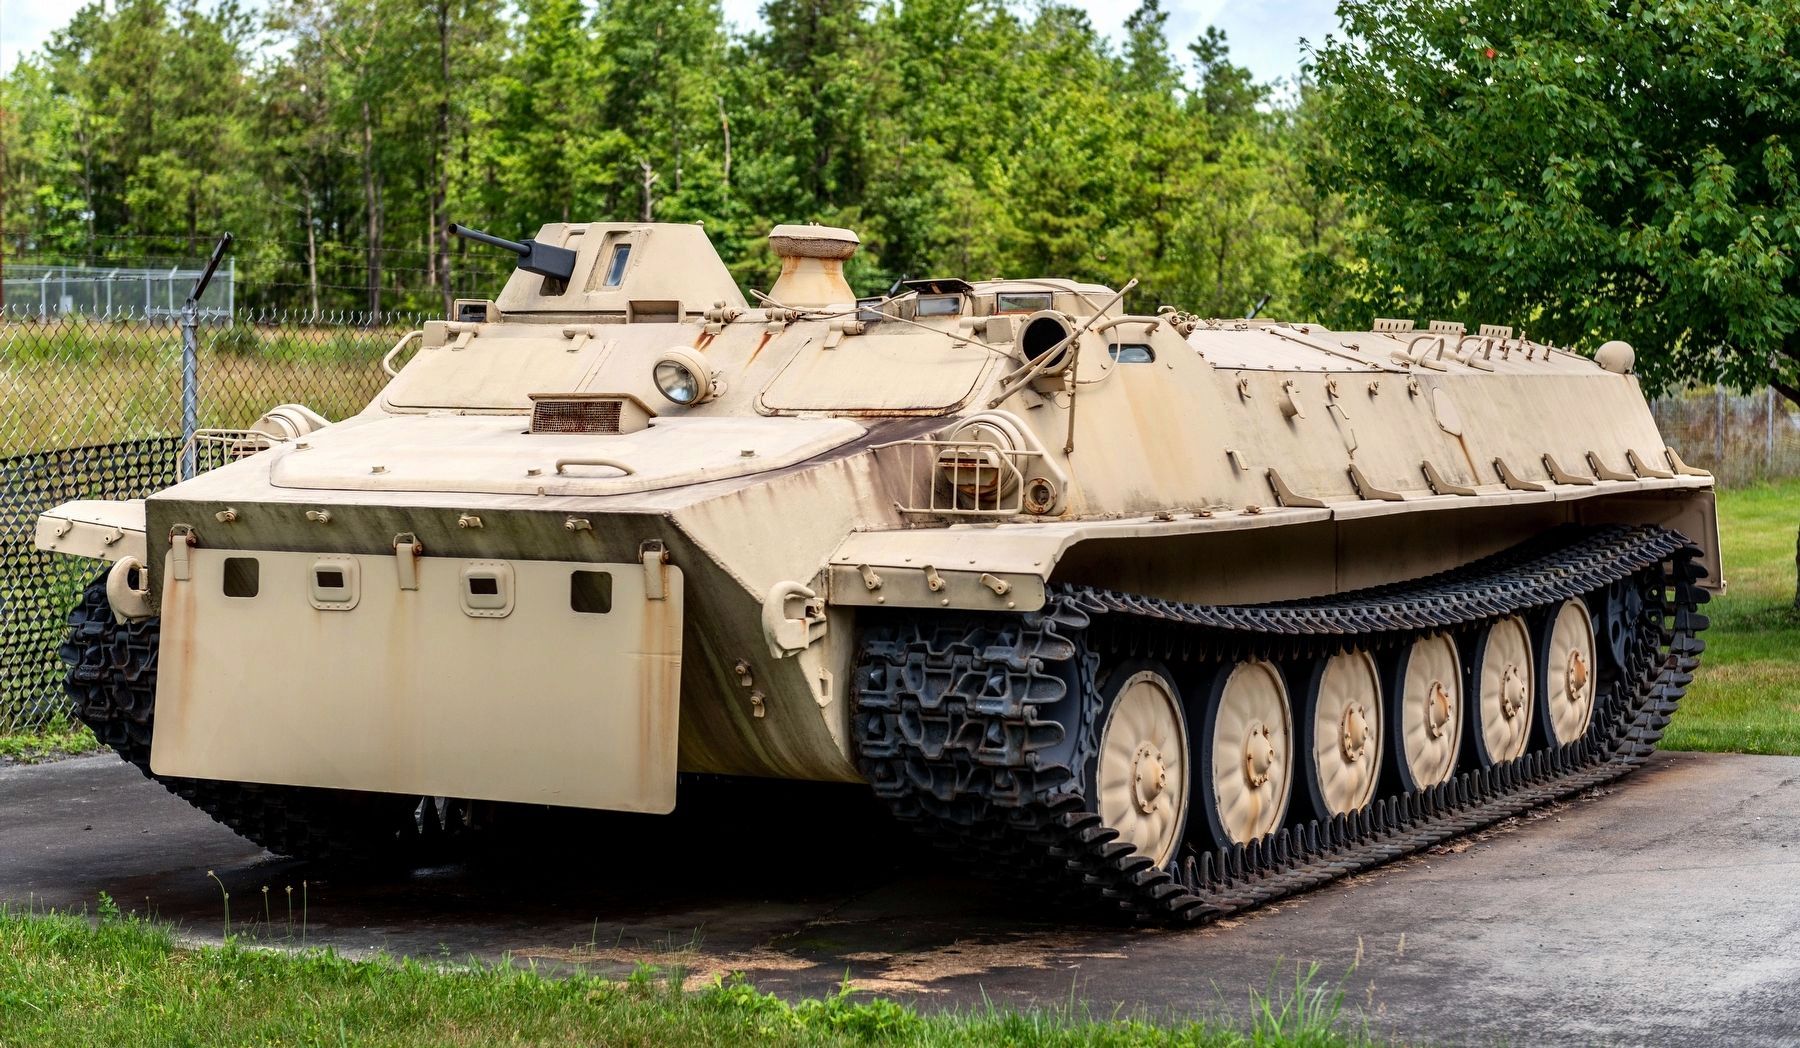 MT-LB Armored Personnel Carrier image. Click for full size.